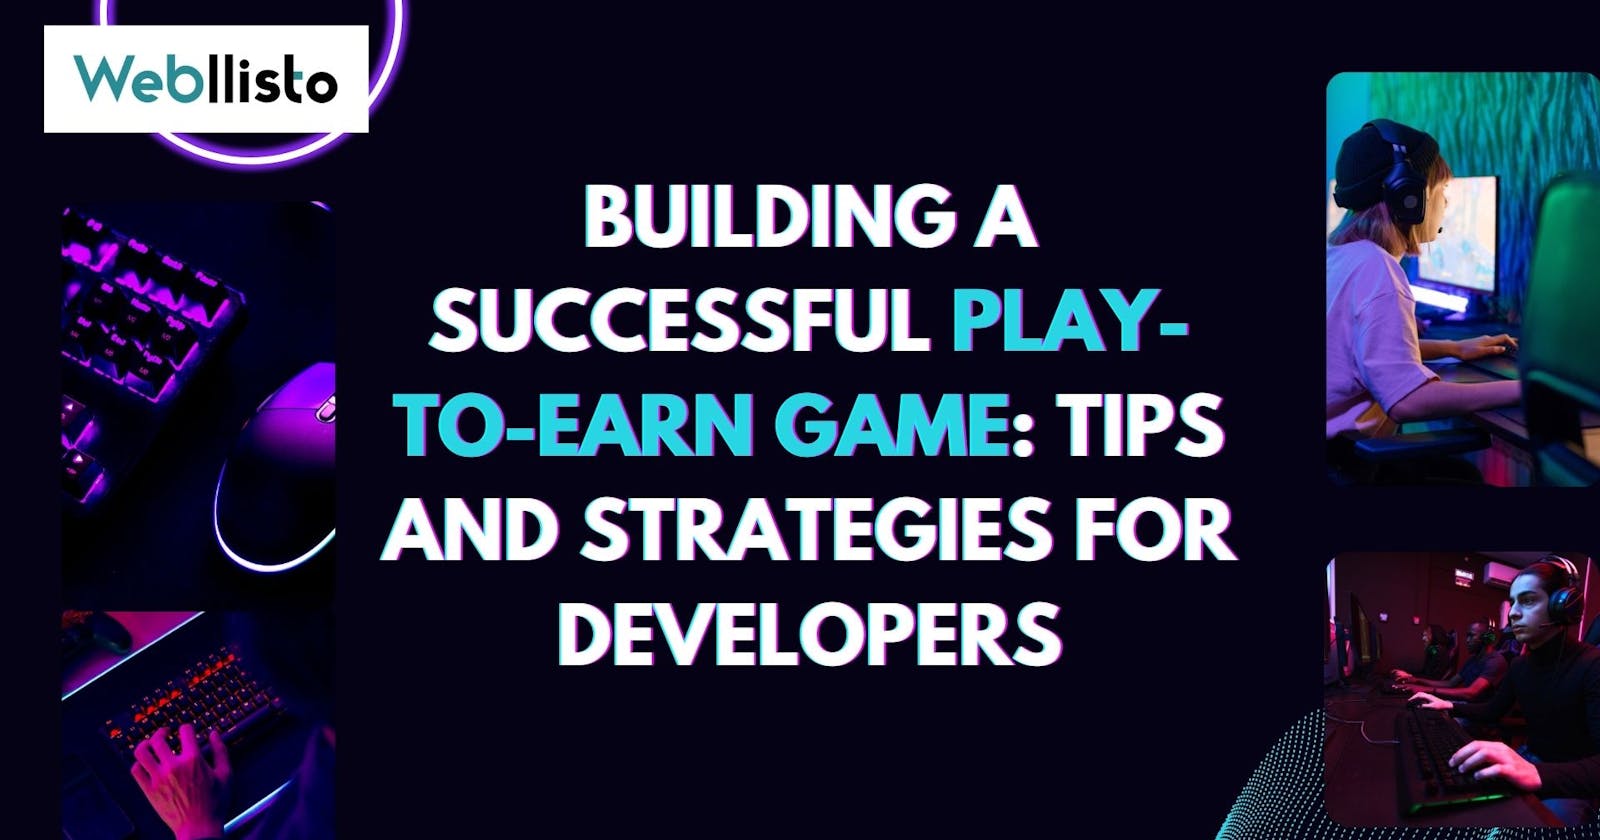 Building a Successful Play-To-Earn Game: Tips and Strategies for Developers